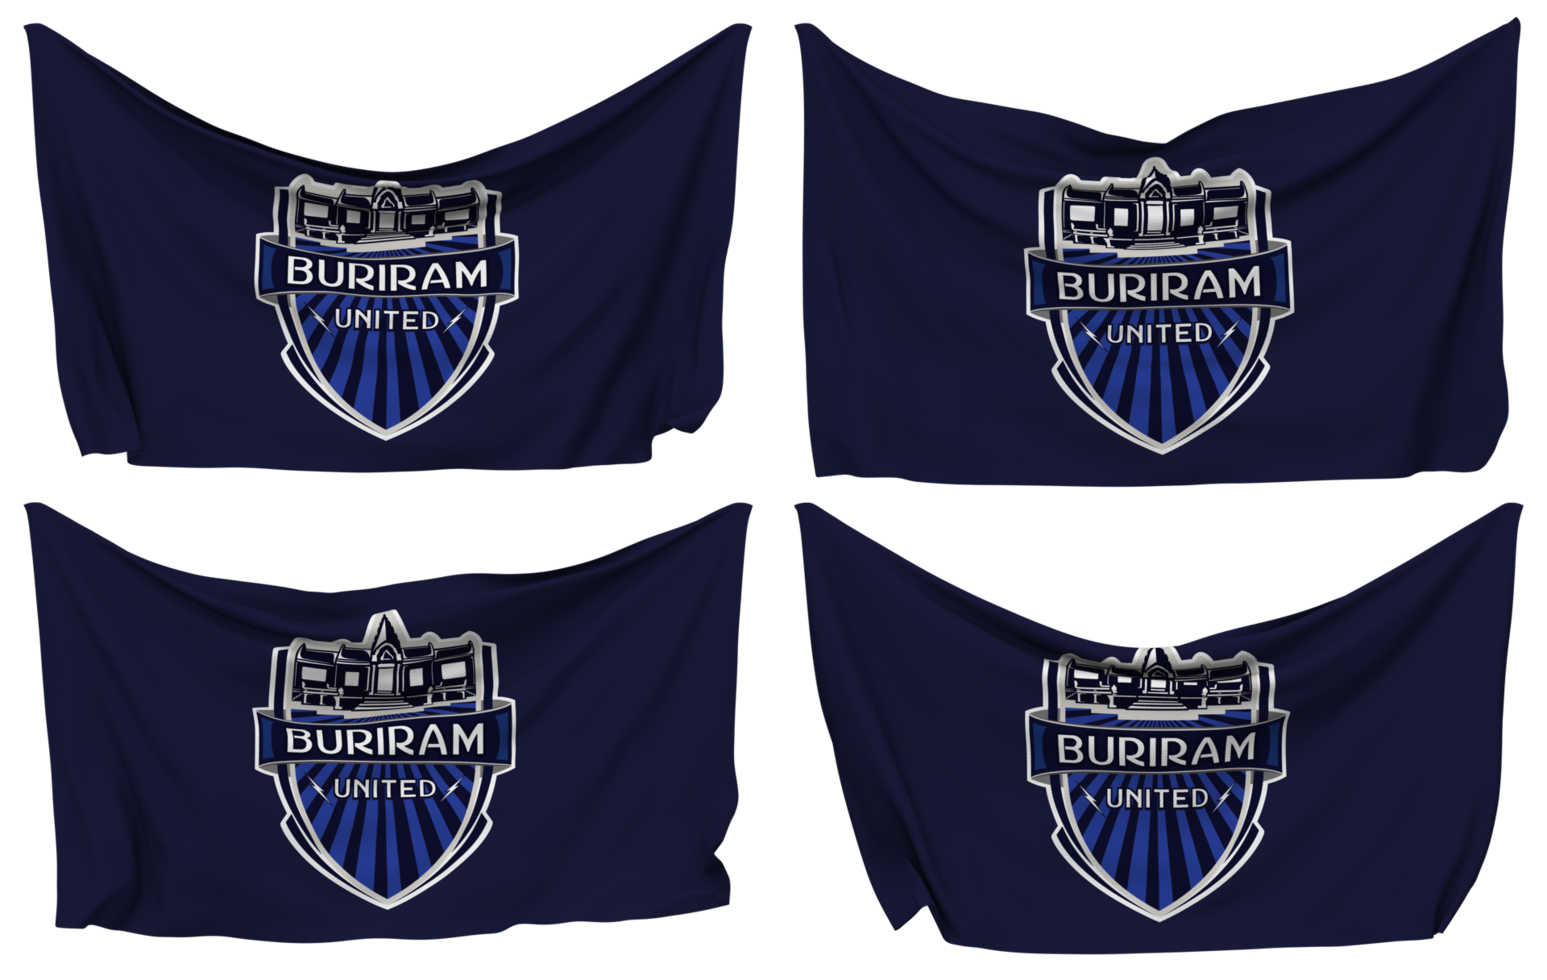 Buriram United Football Club Pinned Flag from Corners, Isolated with Different Waving Variations, 3D Rendering png